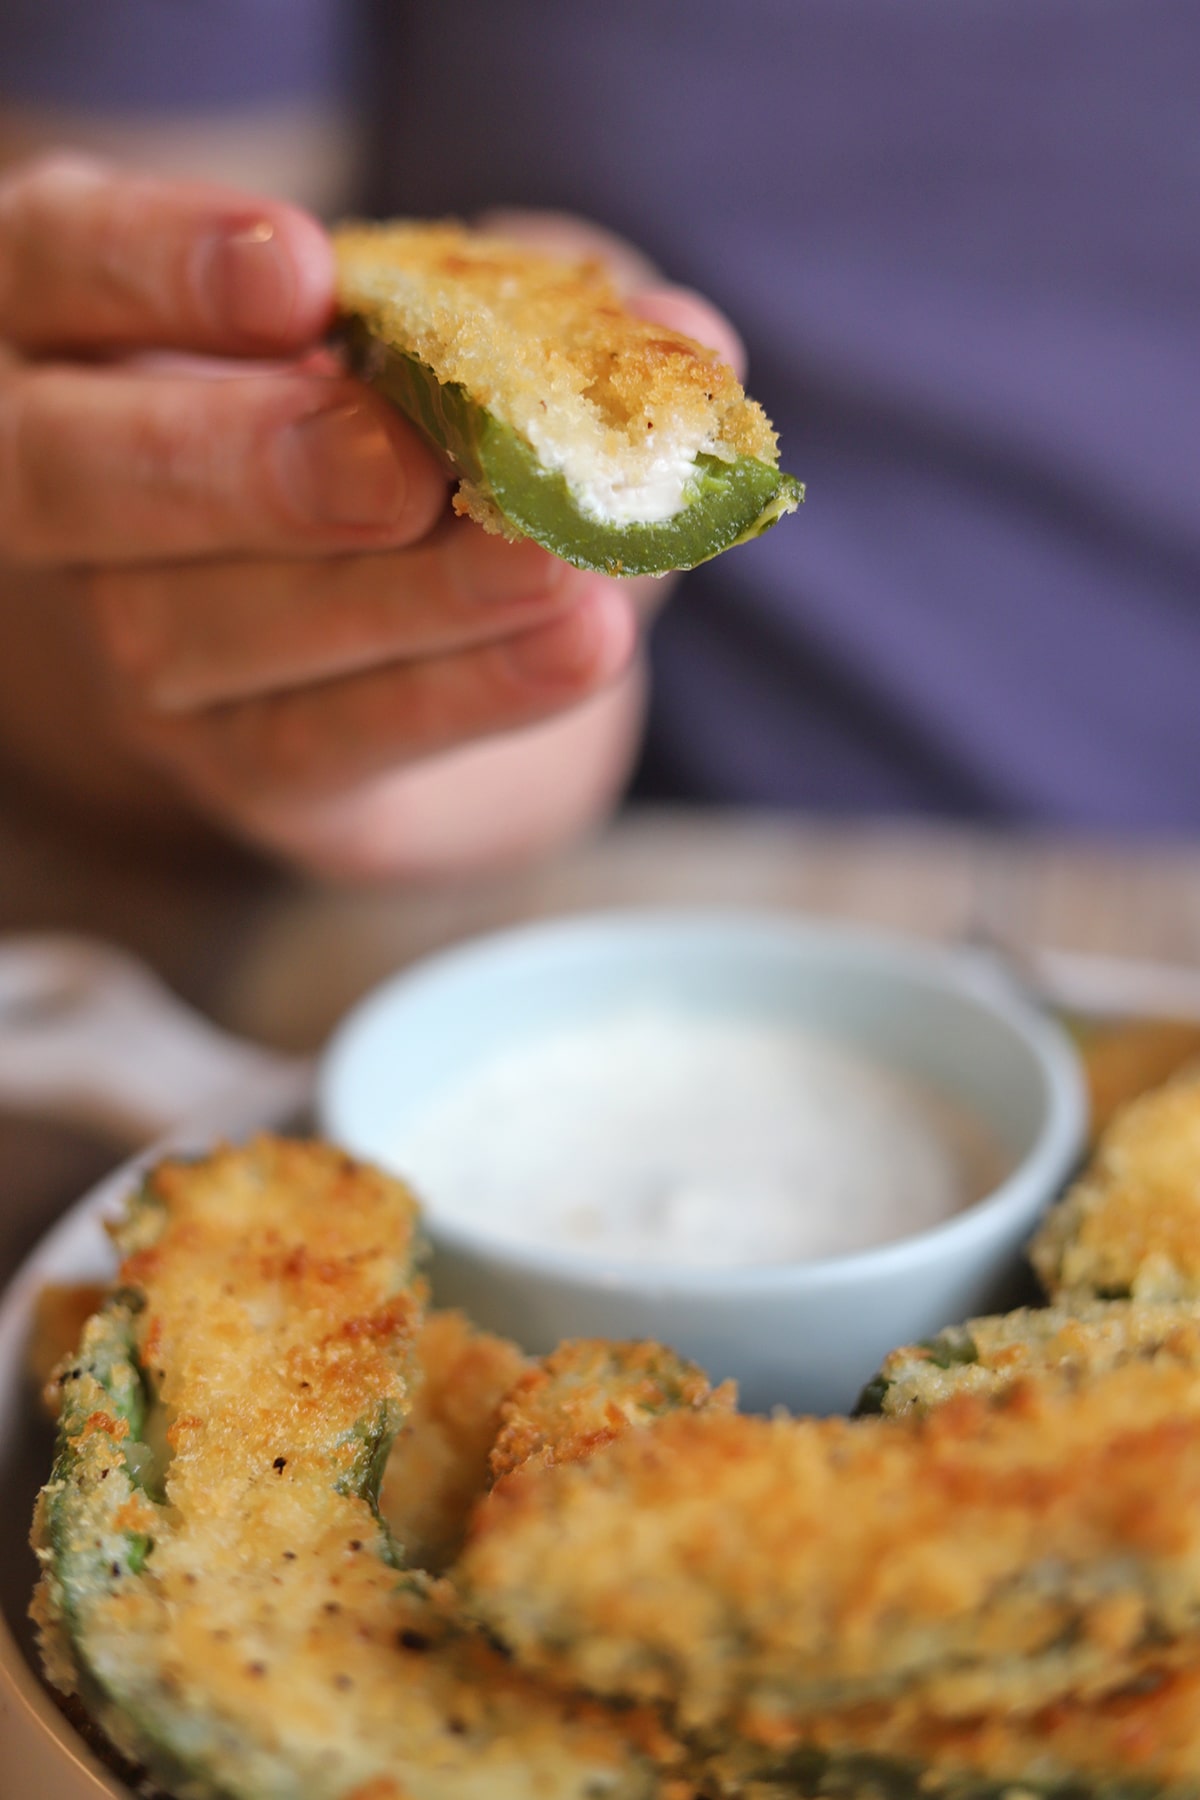 Cream cheese exposed in a breaded jalapeno popper.